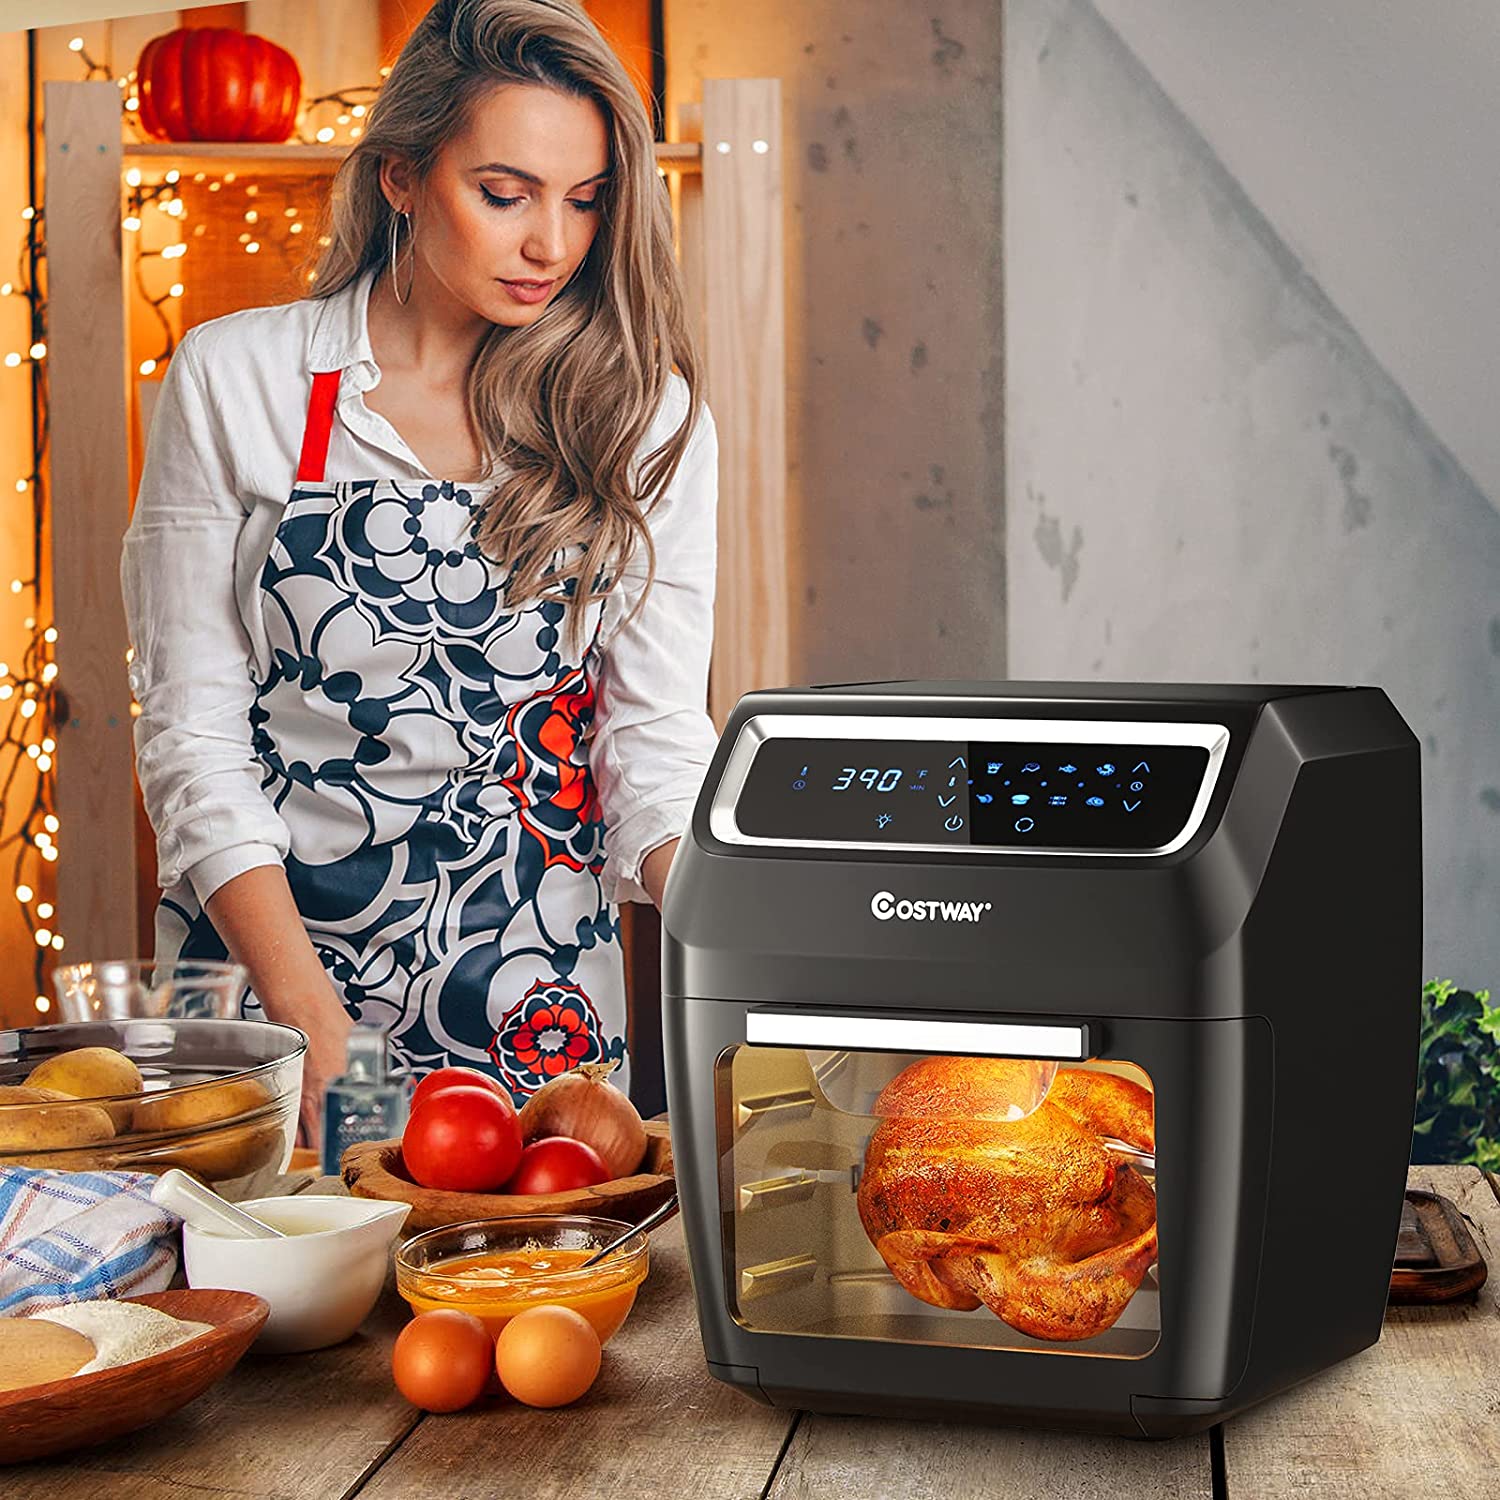 Chairlivingc 8-In-1 Convection Air Dehydrator Oven 1700W Countertop Air Fryer Toaster Oven Air Broiler with Touch Screen Rotisserie Accessories